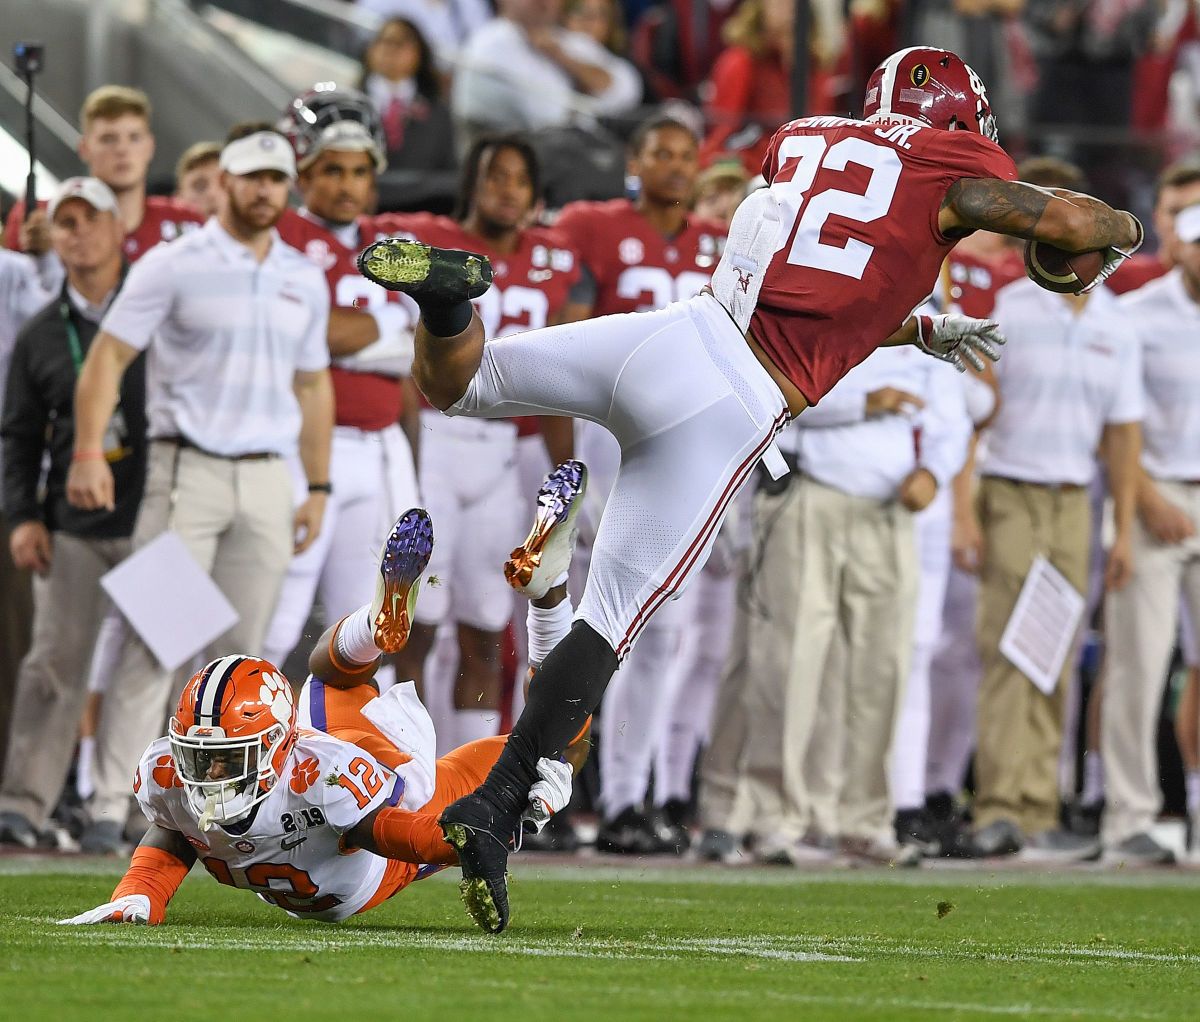 Clemson defensive back K'Von Wallace (12) brings down Alabama tight end Irv Smith Jr. (82) during the first quarter of the College Football National Championship at Levi's Stadium in Santa Clara, Calif., on January 7, 2019.